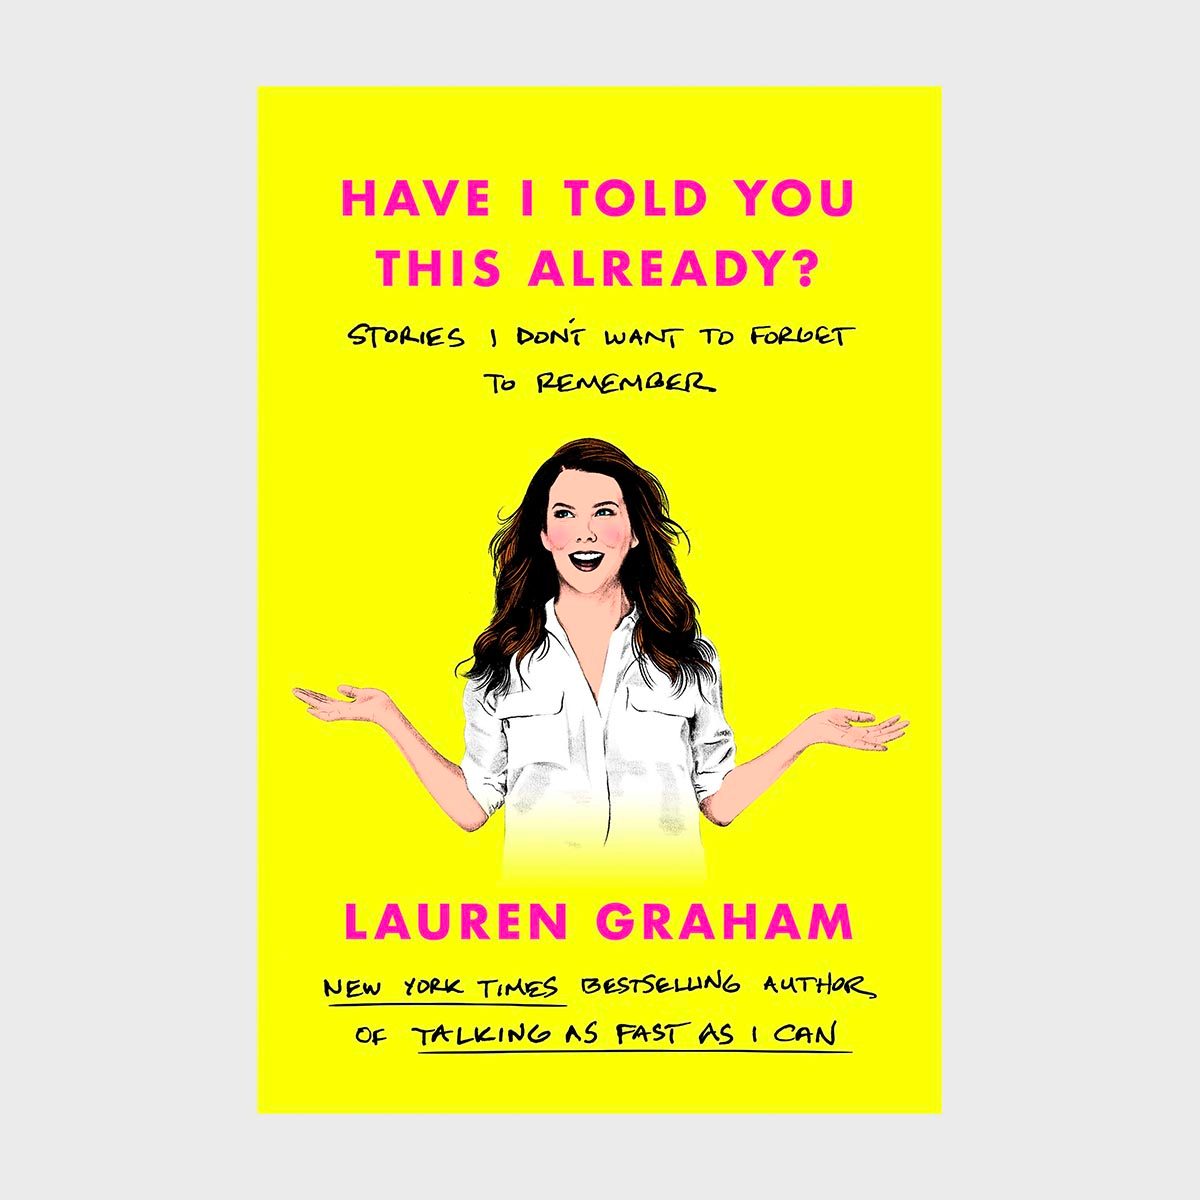 70 Funny Books to Get You Laughing in 2023